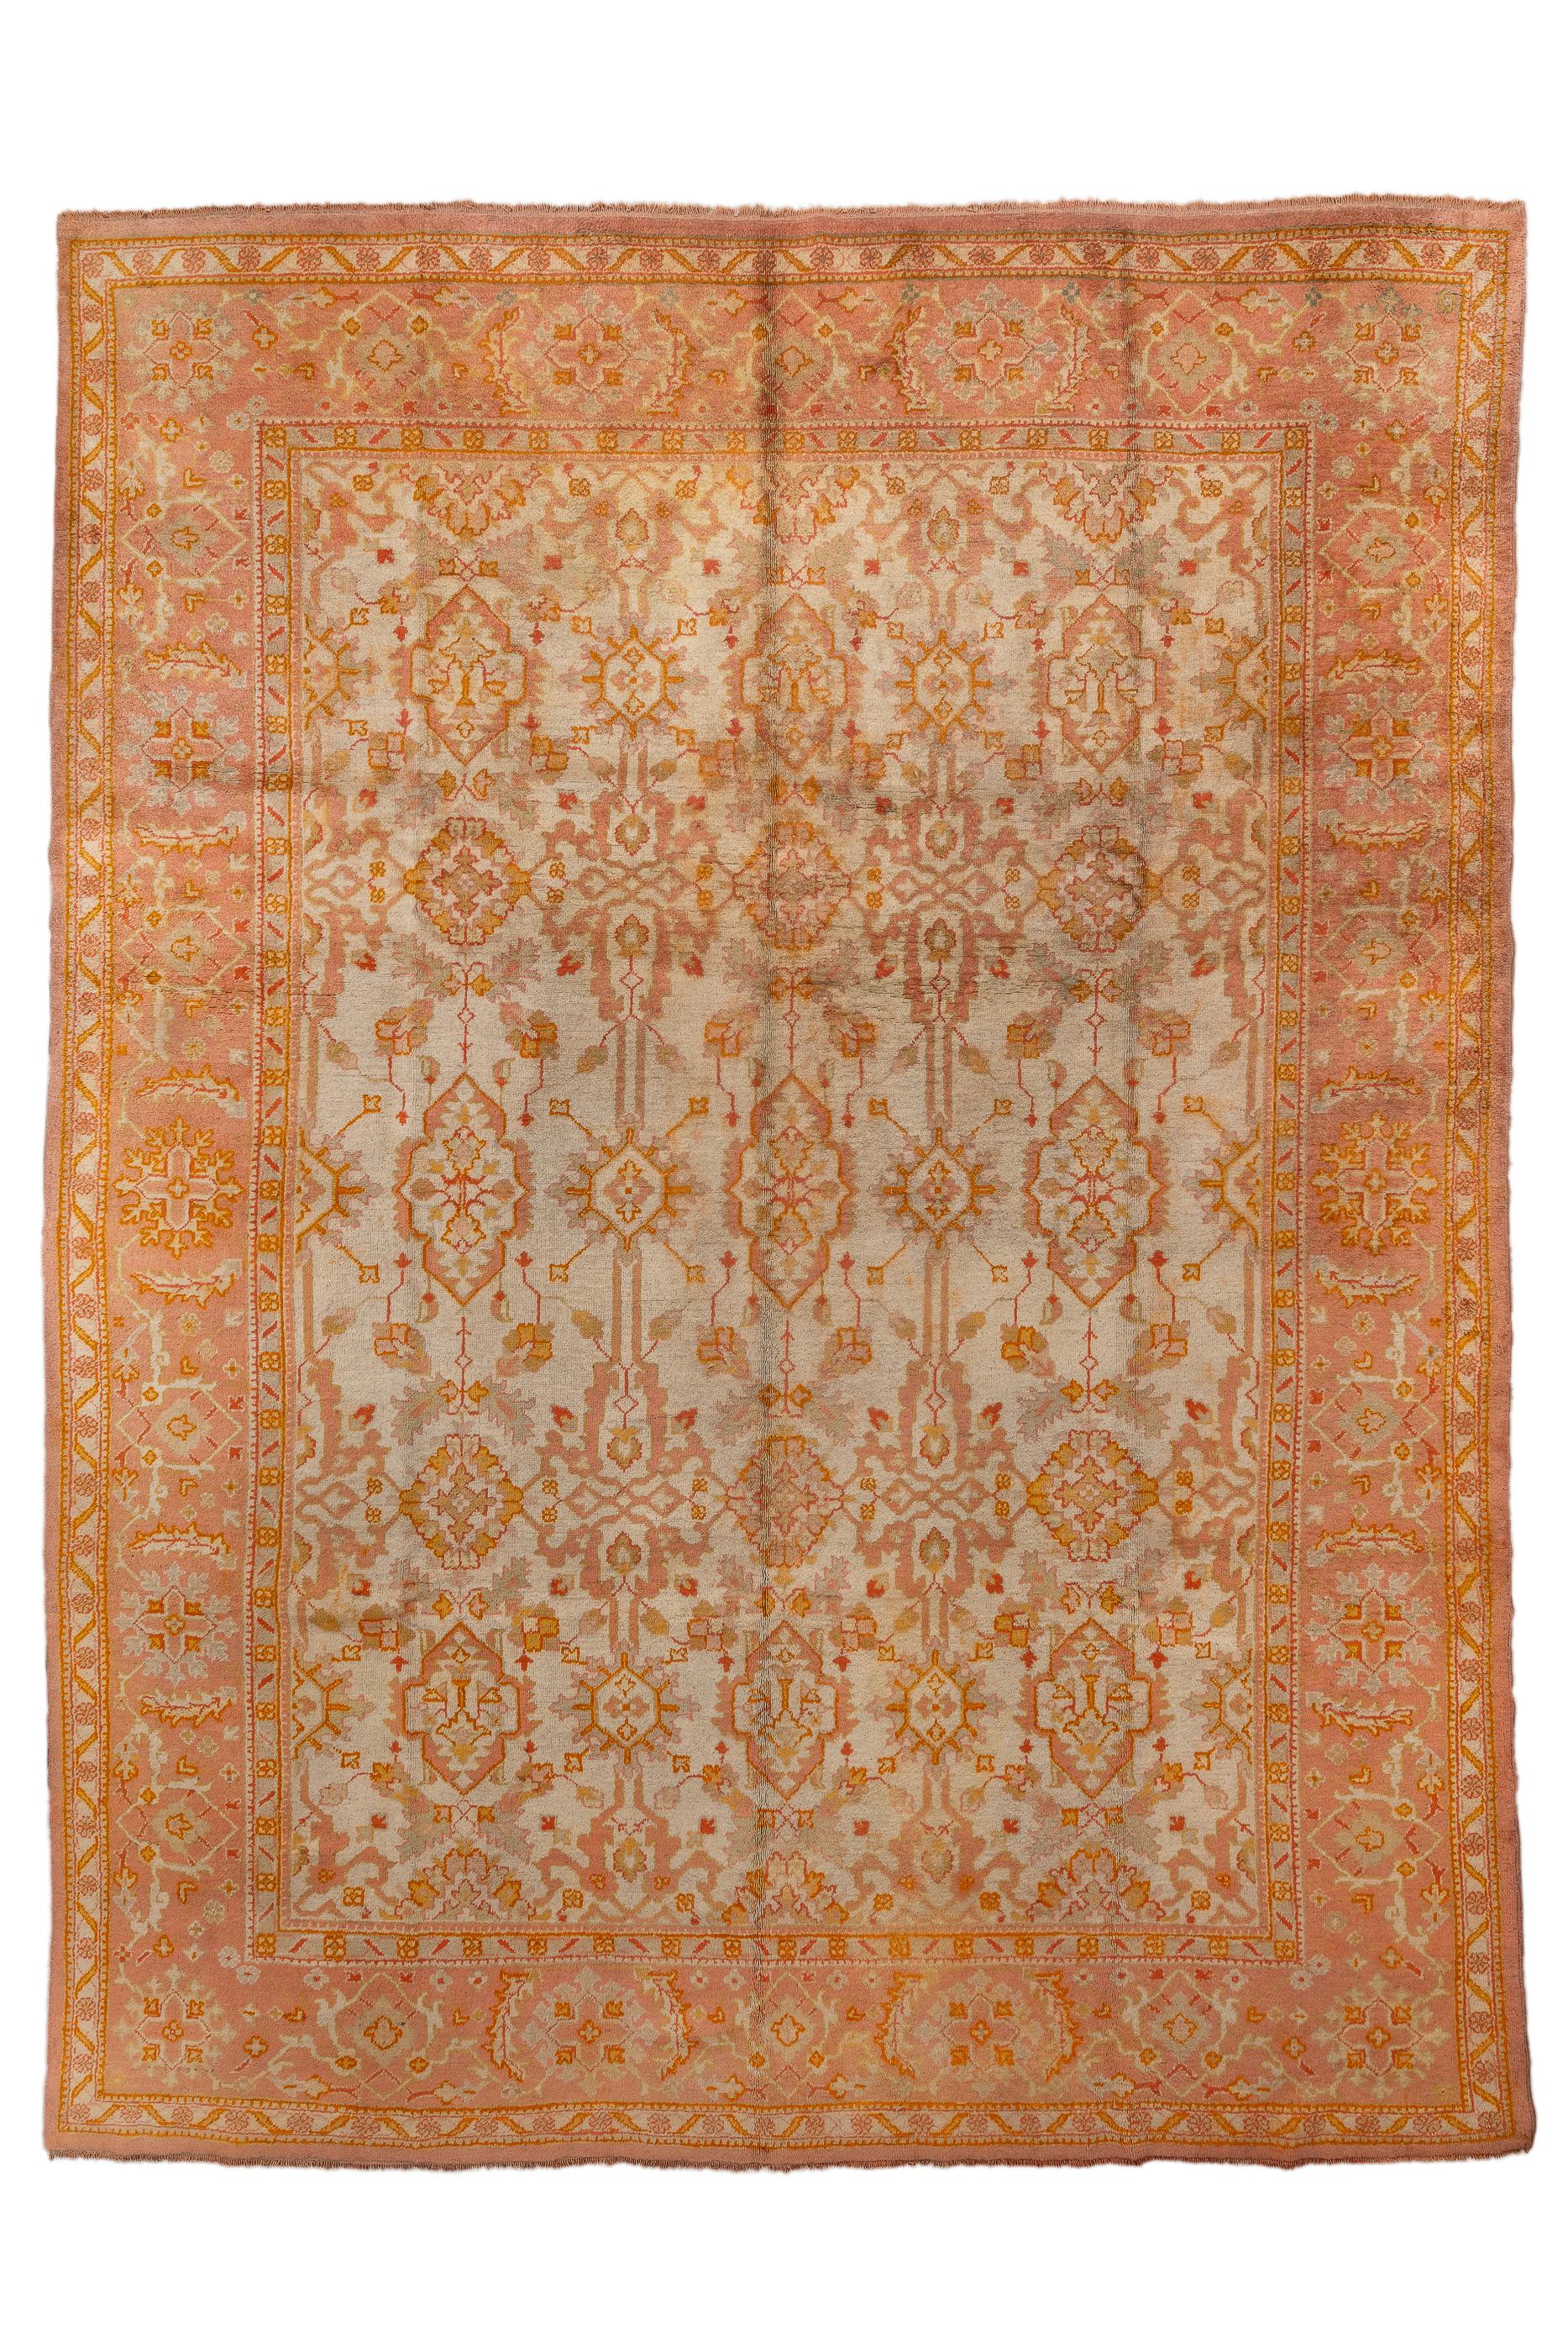 Oushak Rug (Oushaq) early XX century. This antique Oushak is completely hand knotted in lustrous wool. A Very pleasant decorative carpet with delicate and pale colors perfectly combined in contrast with the main border and the decoration on ivory